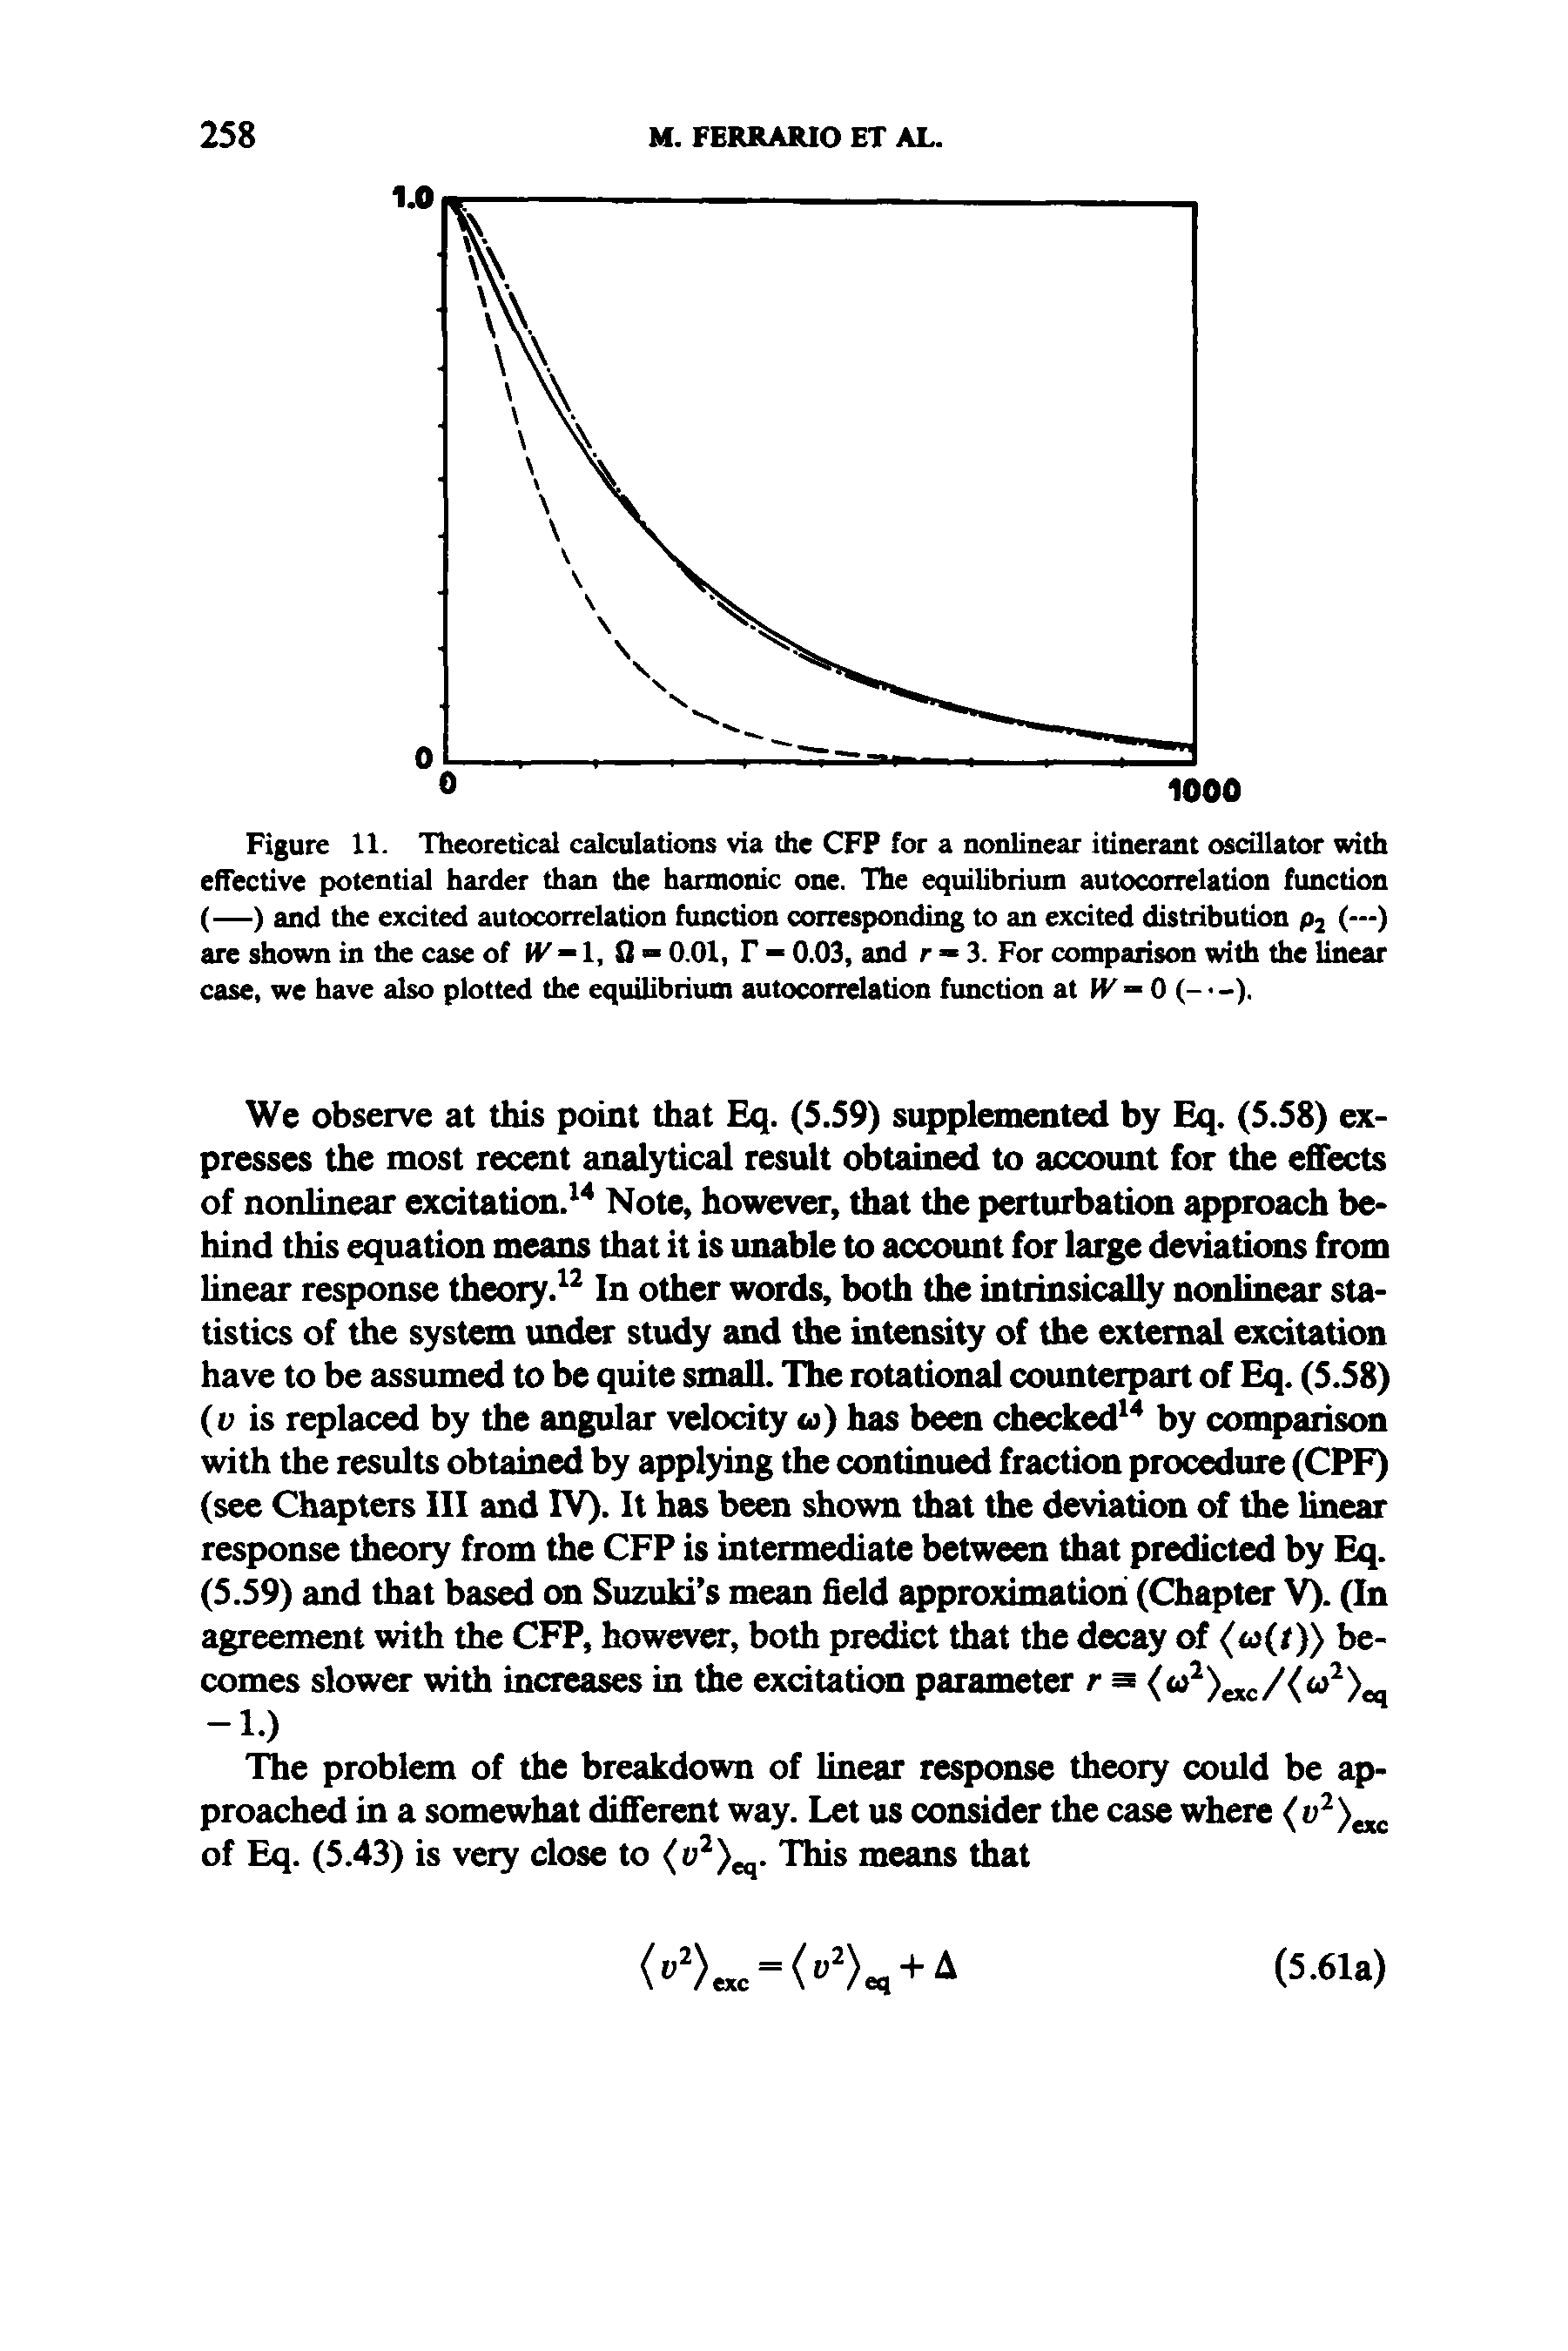 Figure 11. Theoretical calculations via the CFP for a nonlinear itinerant oscillator with eflective potential harder than the harmonic one. The equilibrium autocorrelation function (—) and the excited autocorrelation function corresponding to an excited distribution P2 (—) are shown in the case of (F -1, 0 0.01, F - 0.03, and r — 3. For comparison with the linear case, we have also plotted the equilibrium autocorrelation function at (F - 0 (- -).